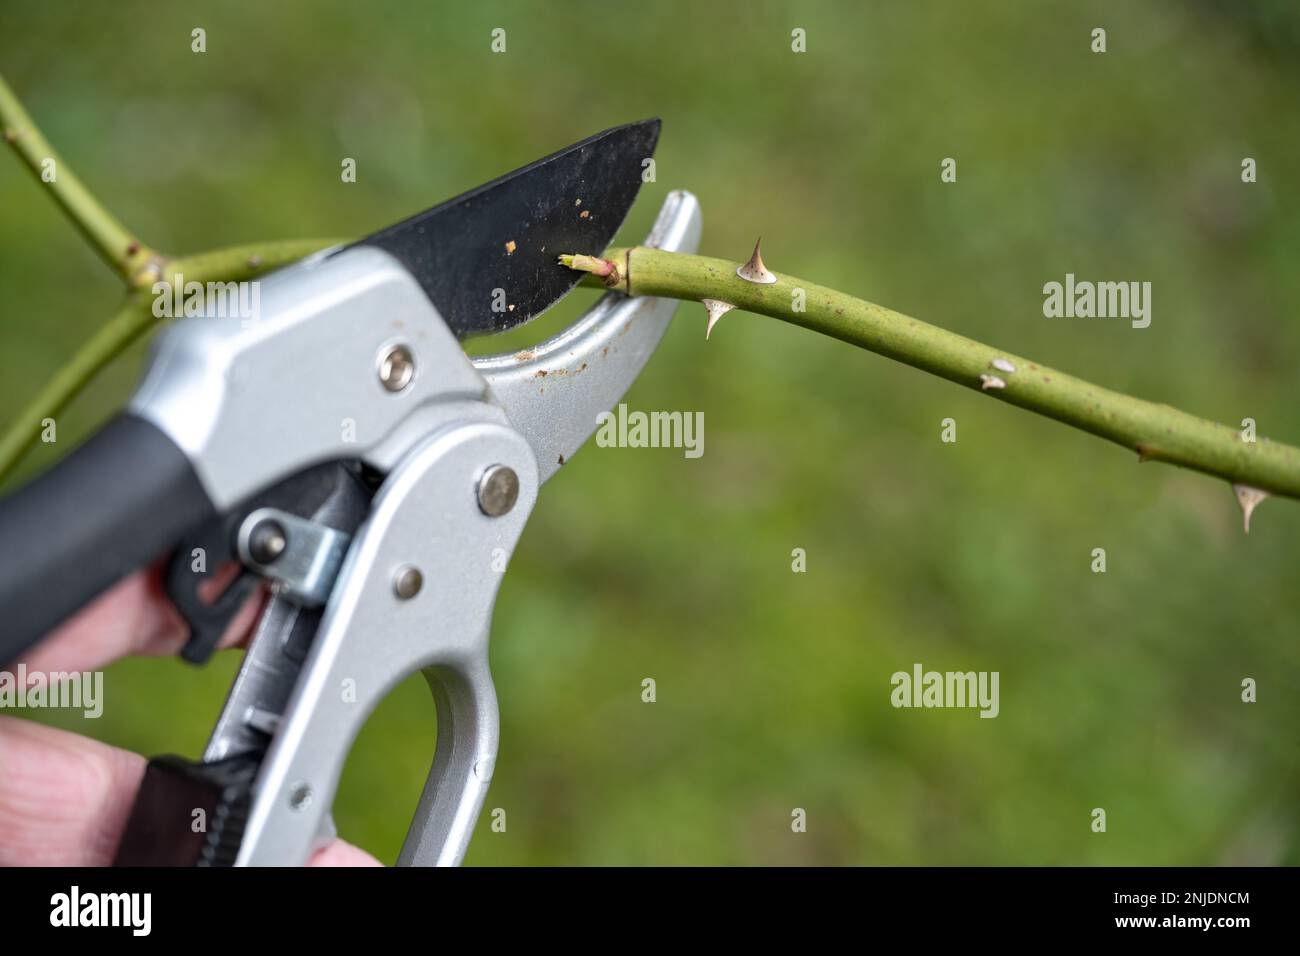 Pruning shears cutting a branch of a rose shrub with an angled cut near a shoot bud, seasonal gardening in spring, natural green background, copy spac Stock Photo